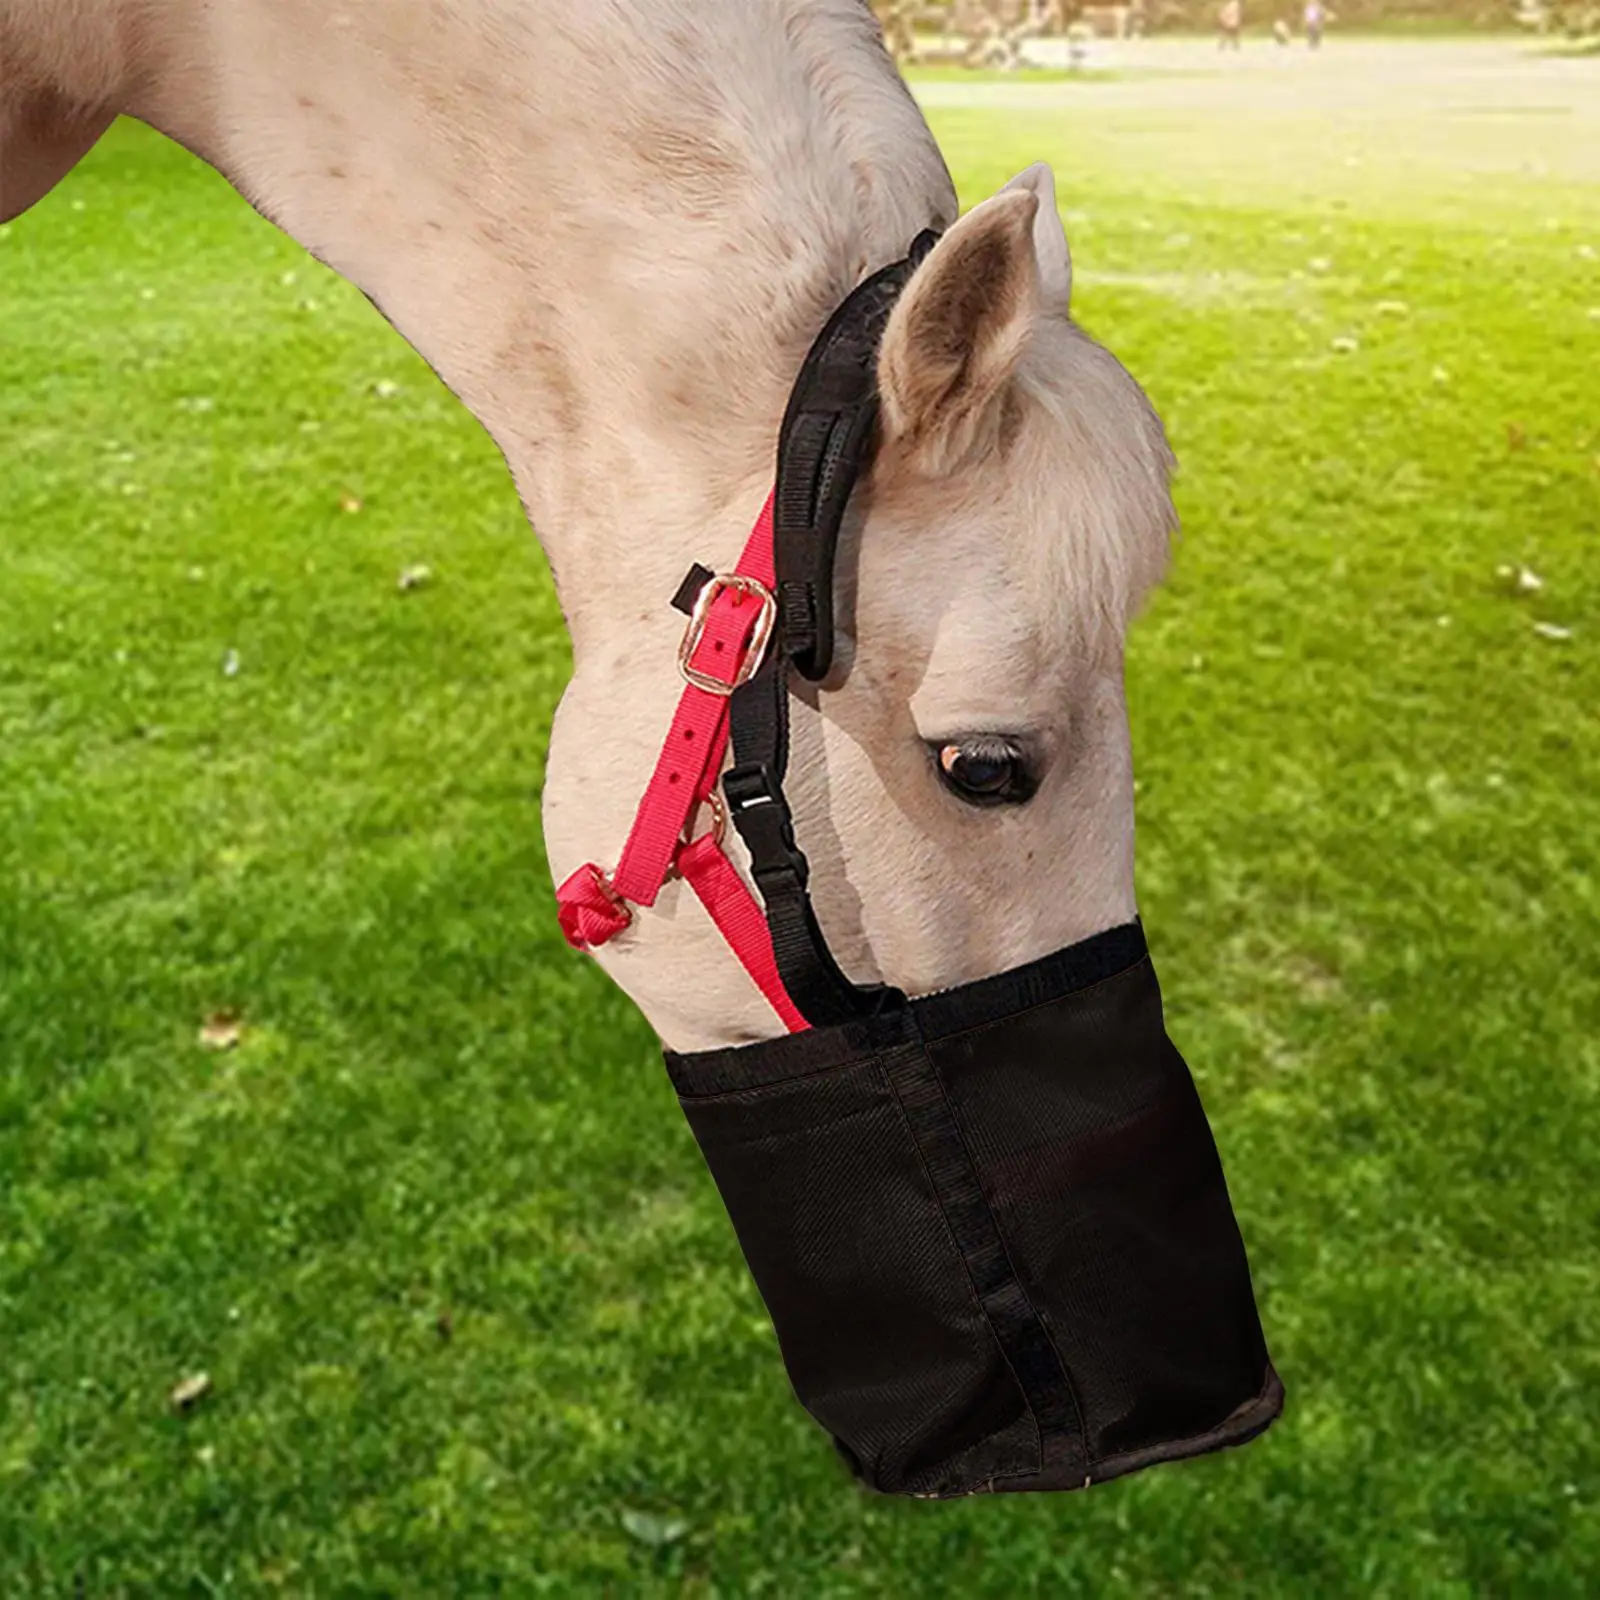 Horse Hay Bag Holder Slow Feeder Container Large Capacity Feeder Bag for Sheep Livestock